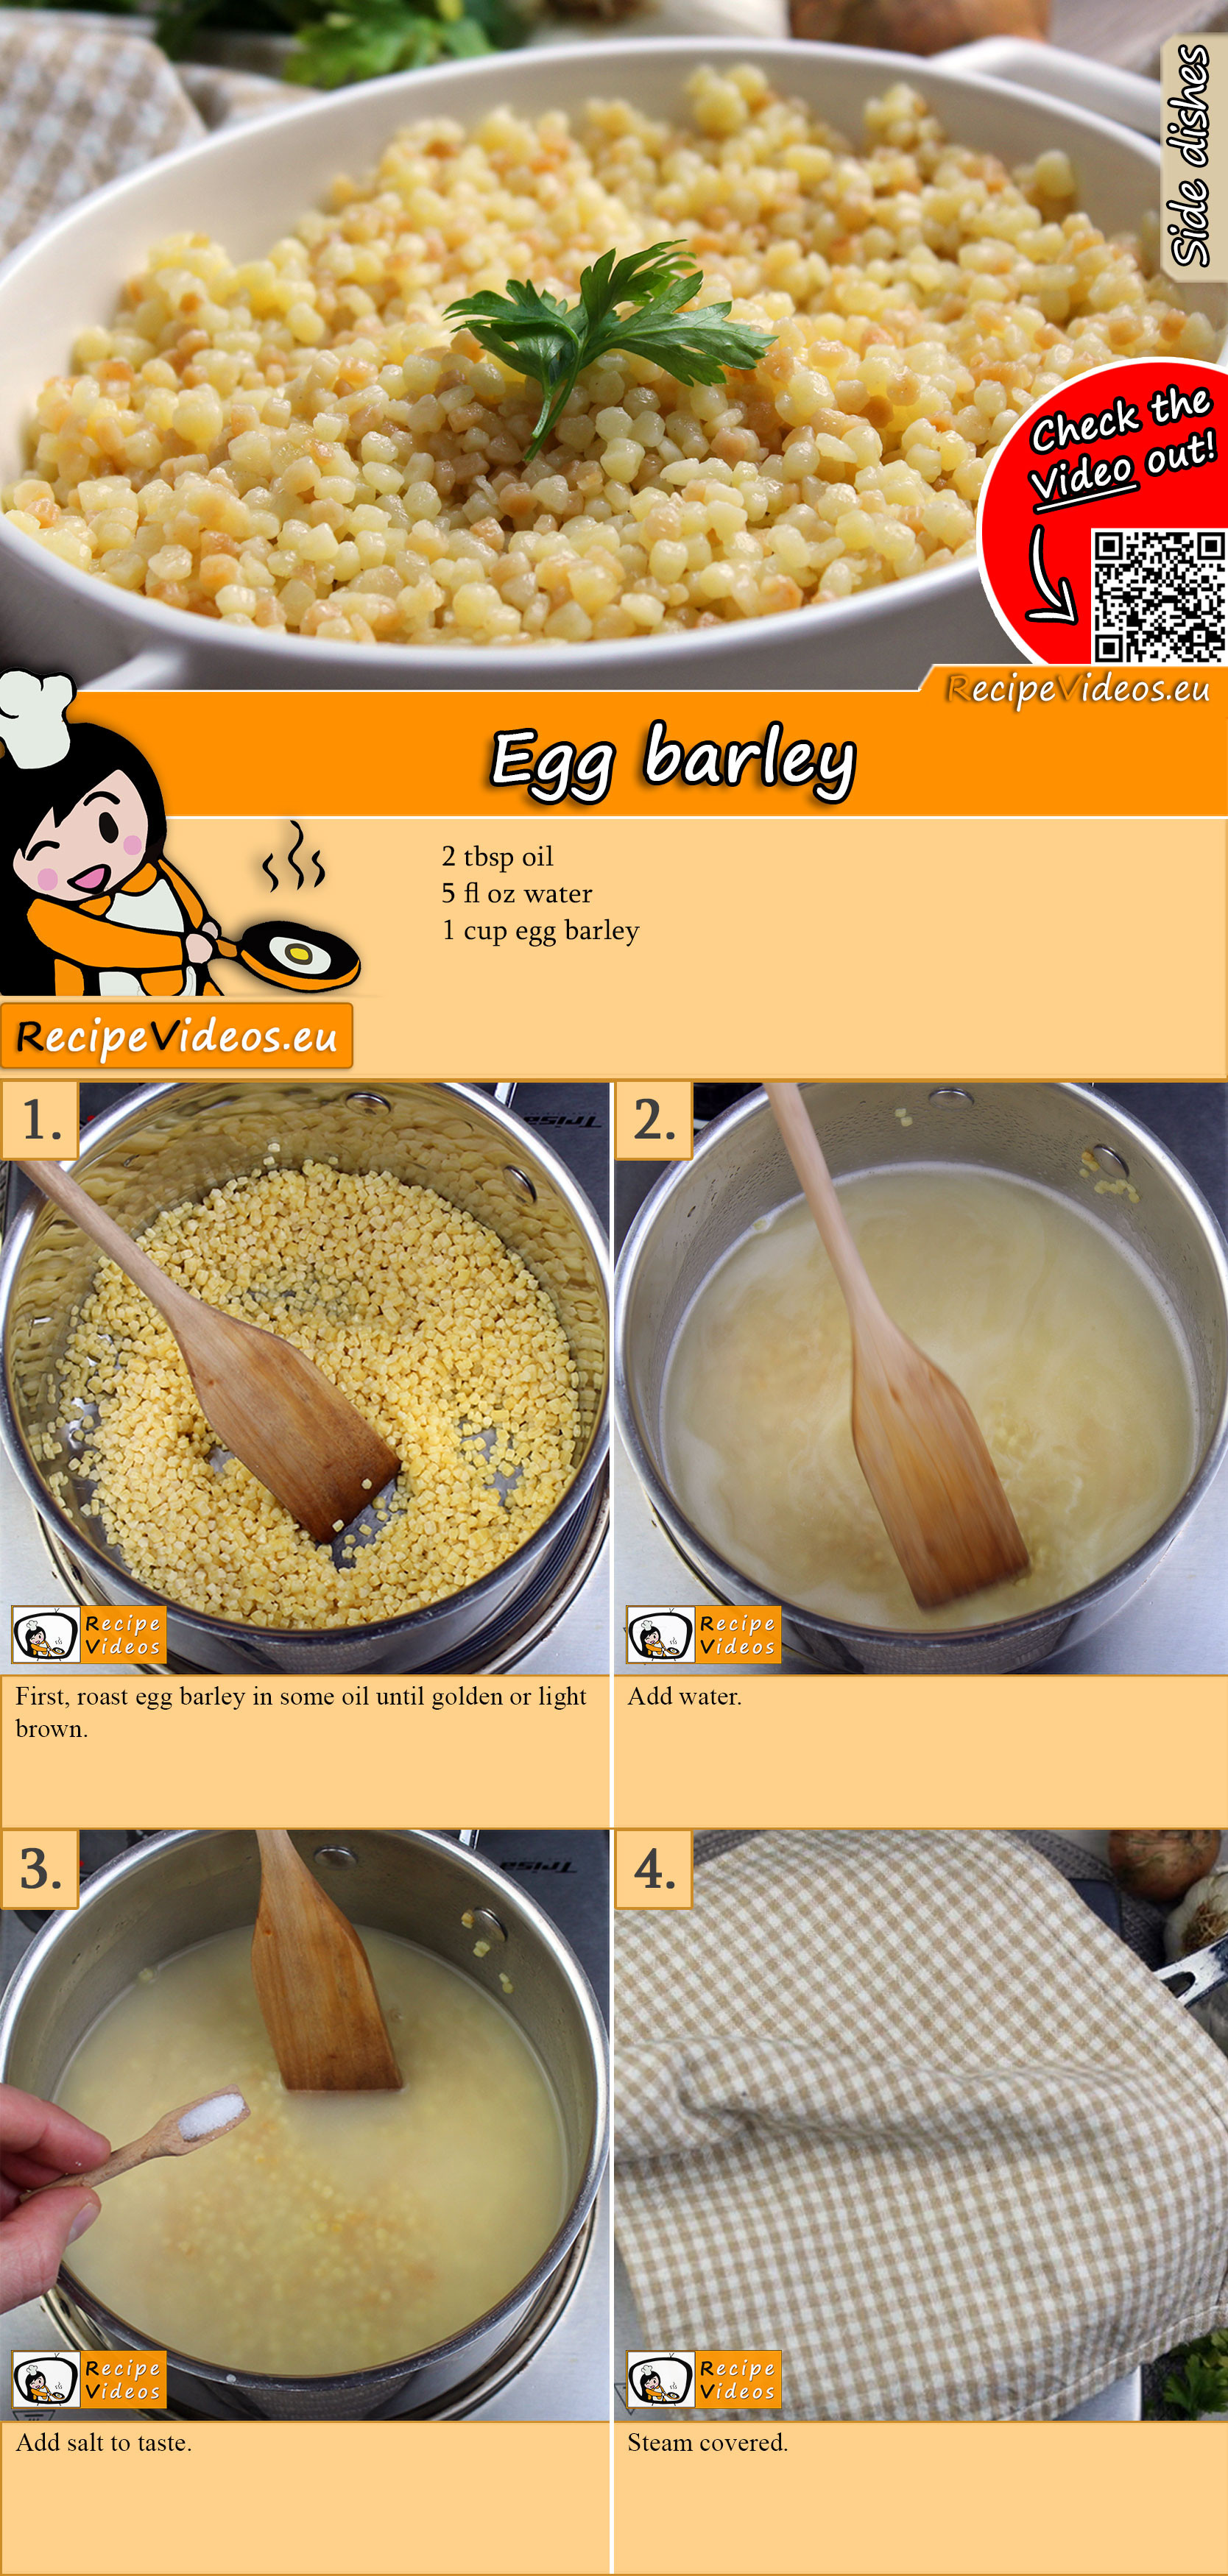 Egg barley recipe with video